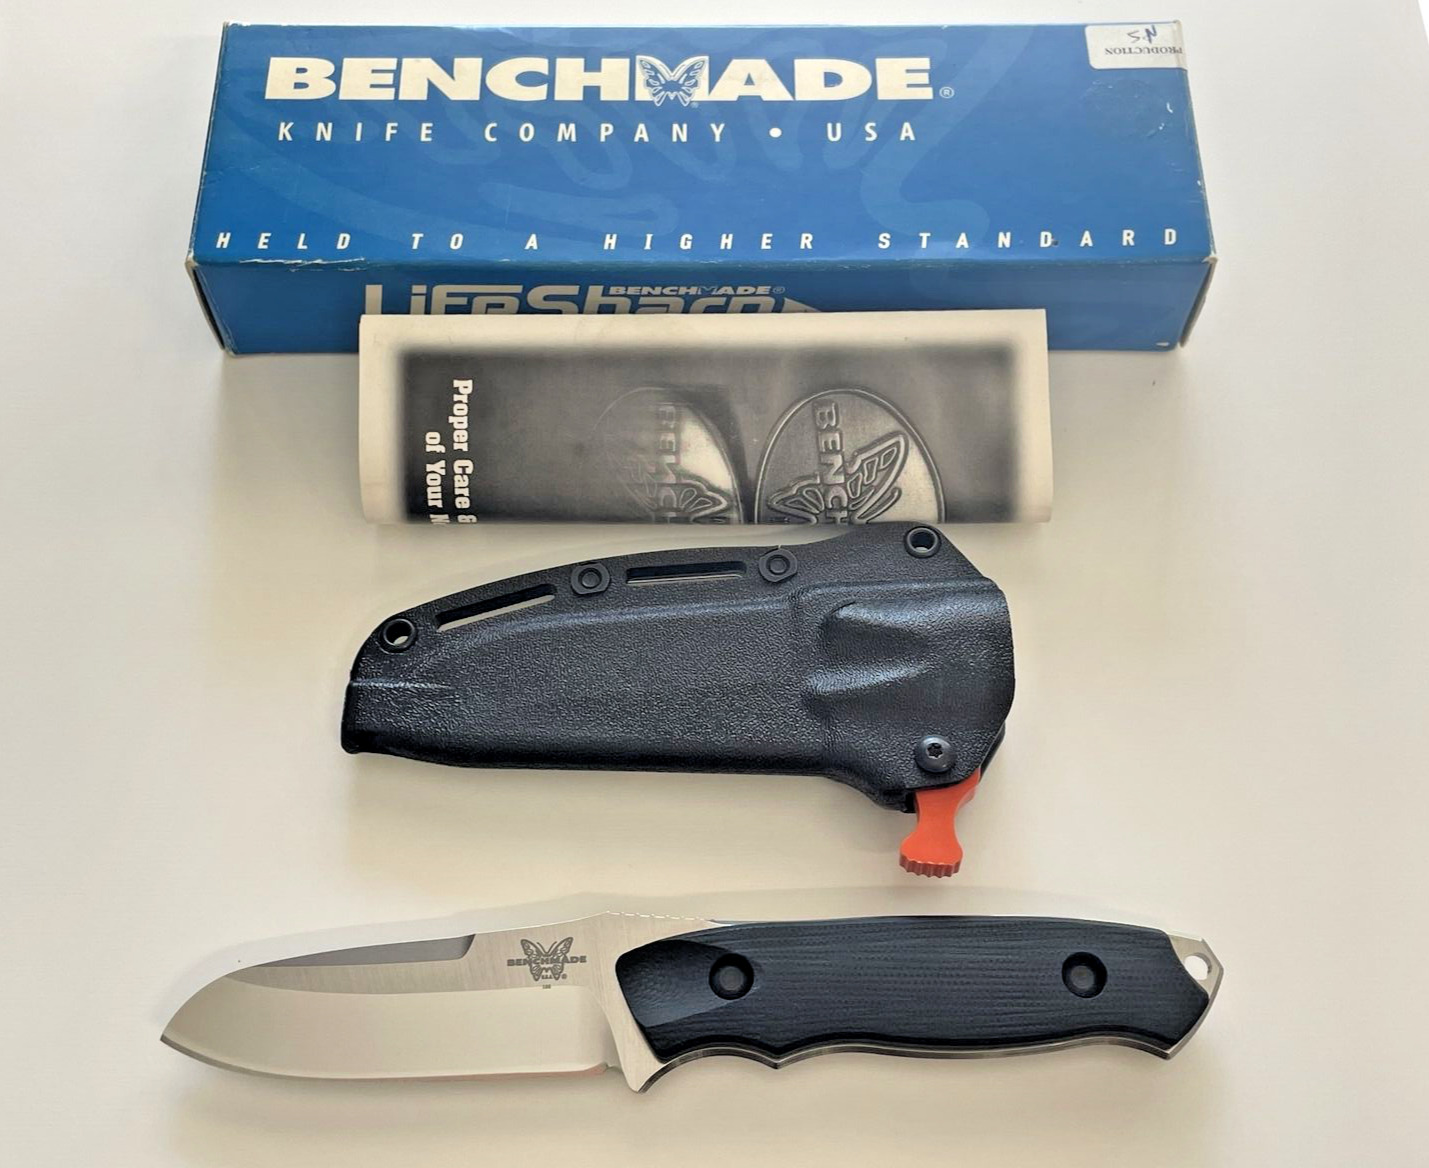 Benchmade 100 R&R River Rescue Knife 1st Production 1000/1000 USA 2001